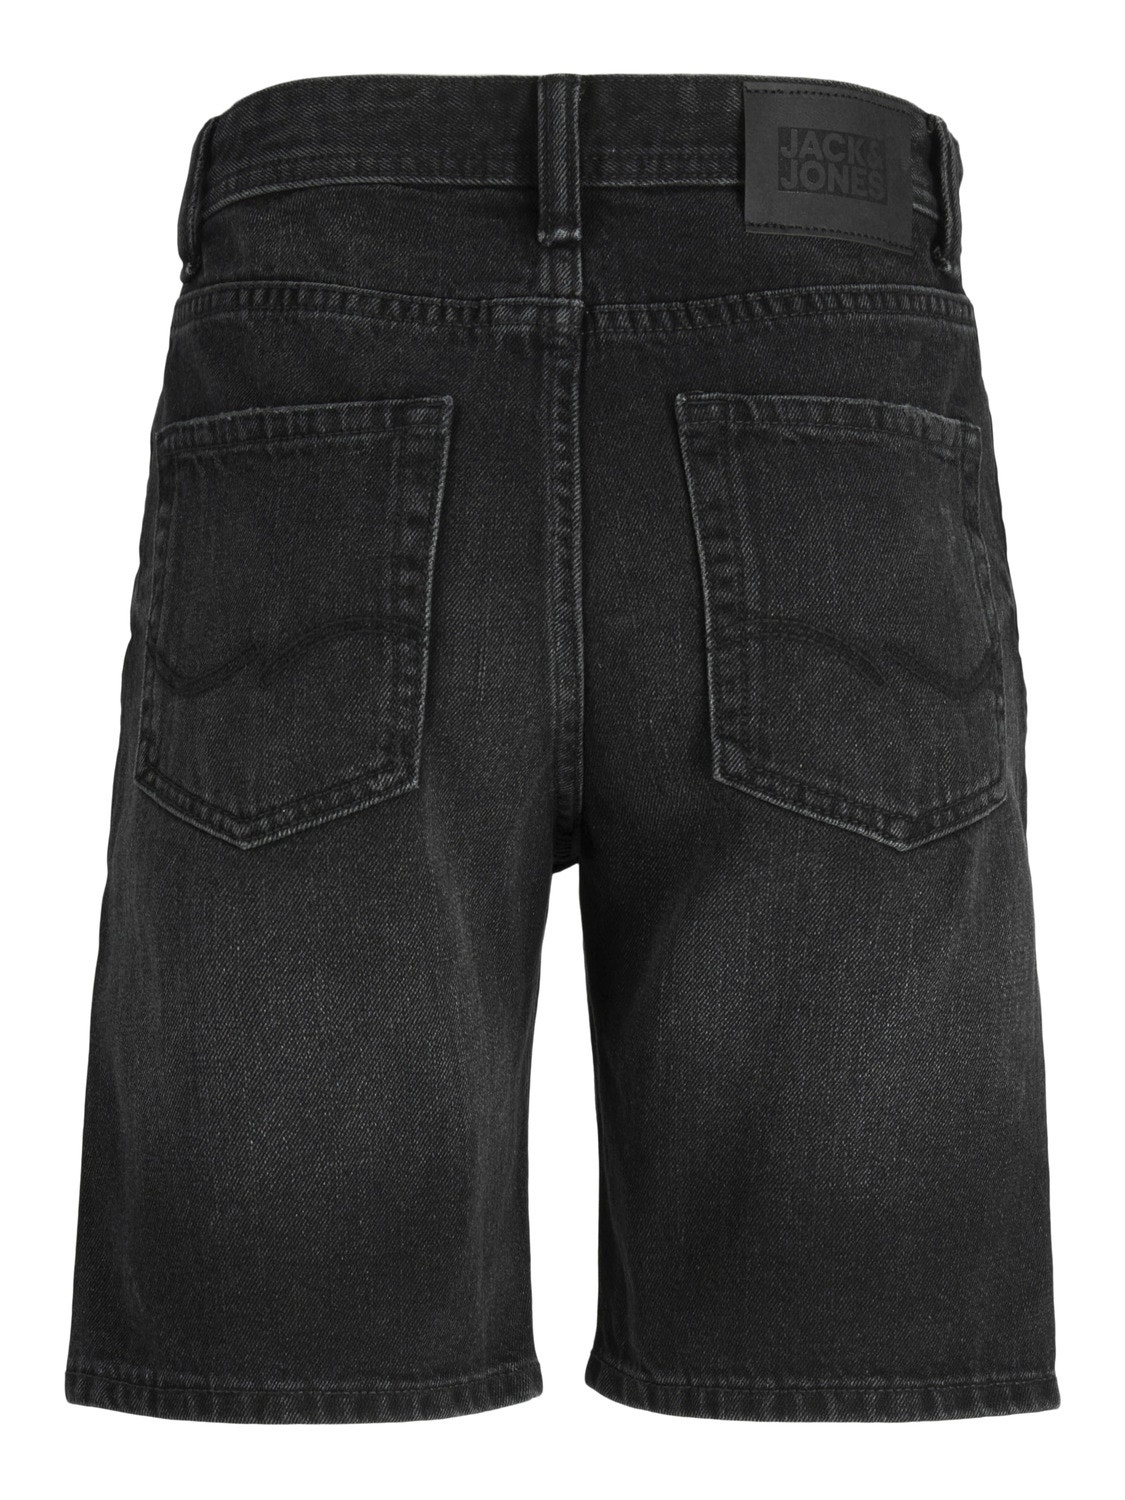 Jack & Jones Relaxed Fit Relaxed Fit Shorts Für jungs -Black Denim - 12249232